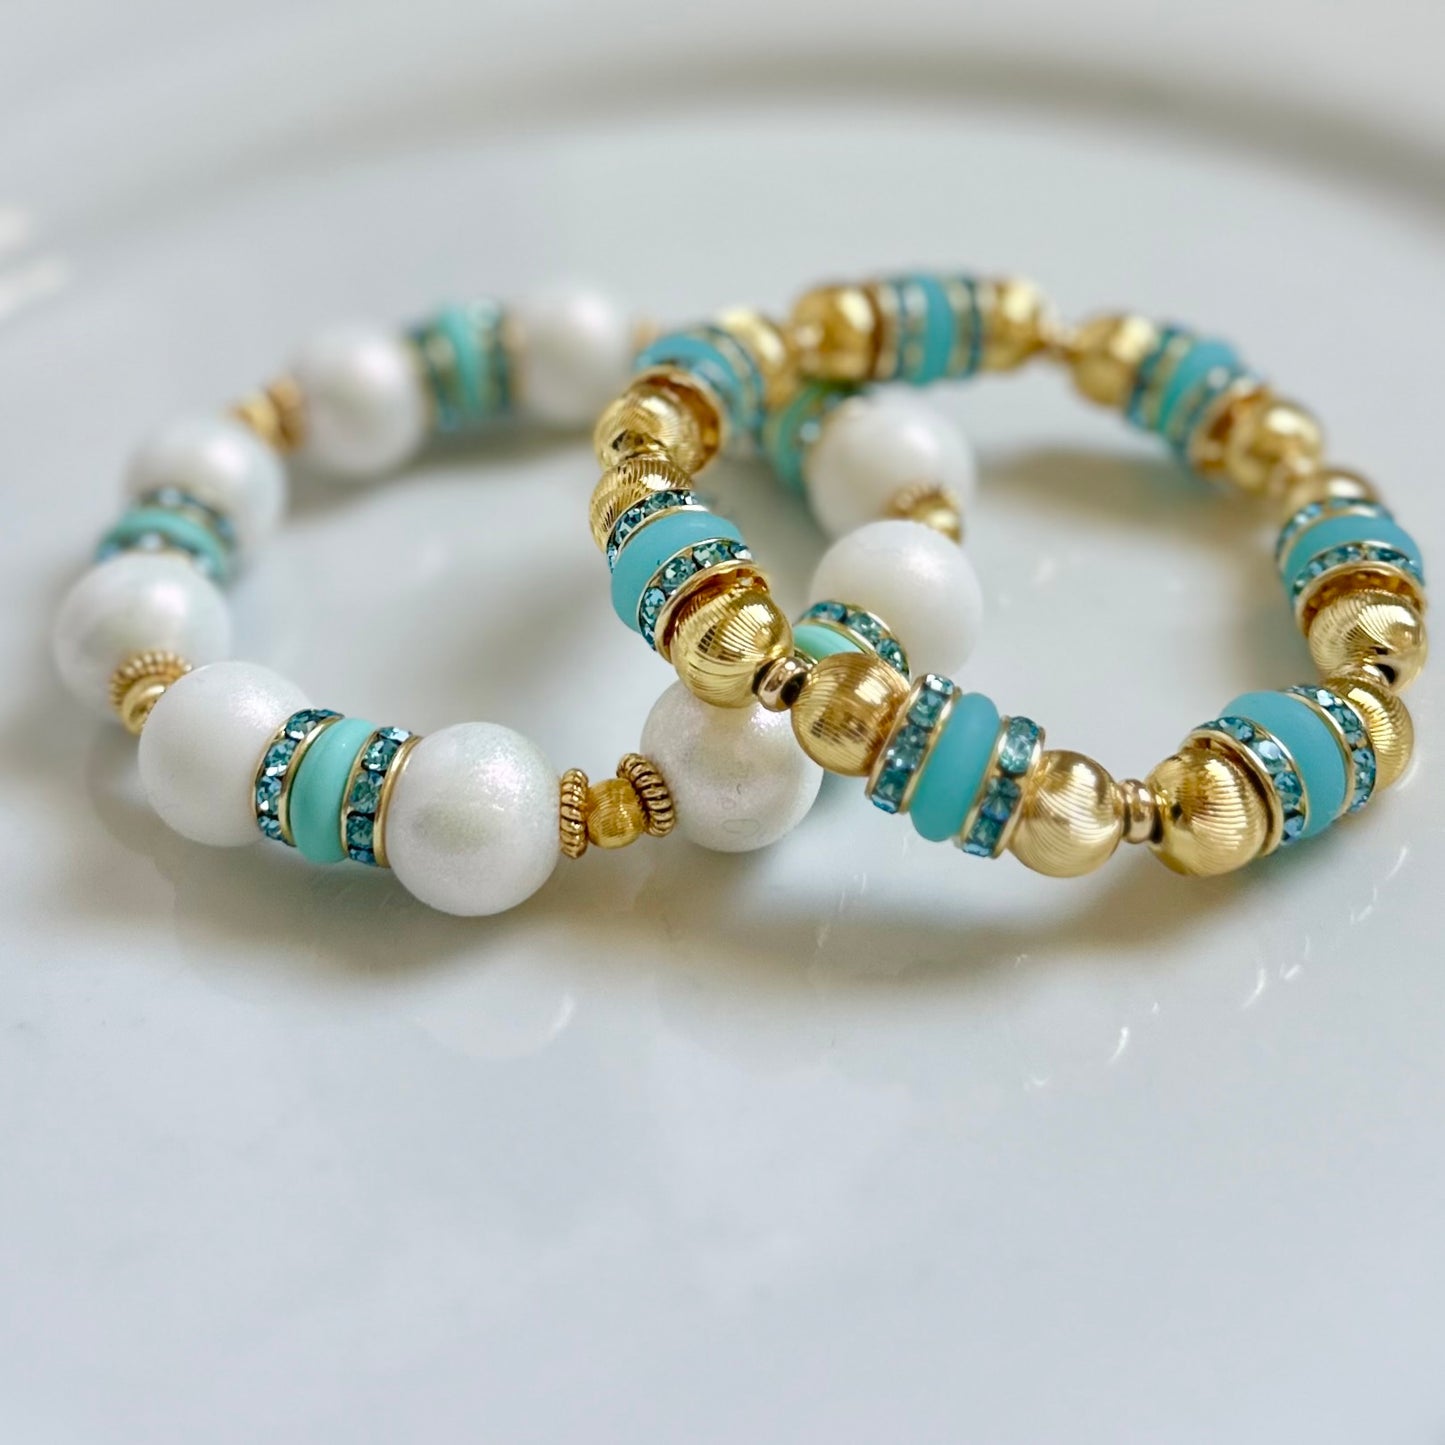 GOLD AND AQUA BRACELET WITH CZ ACCENTS